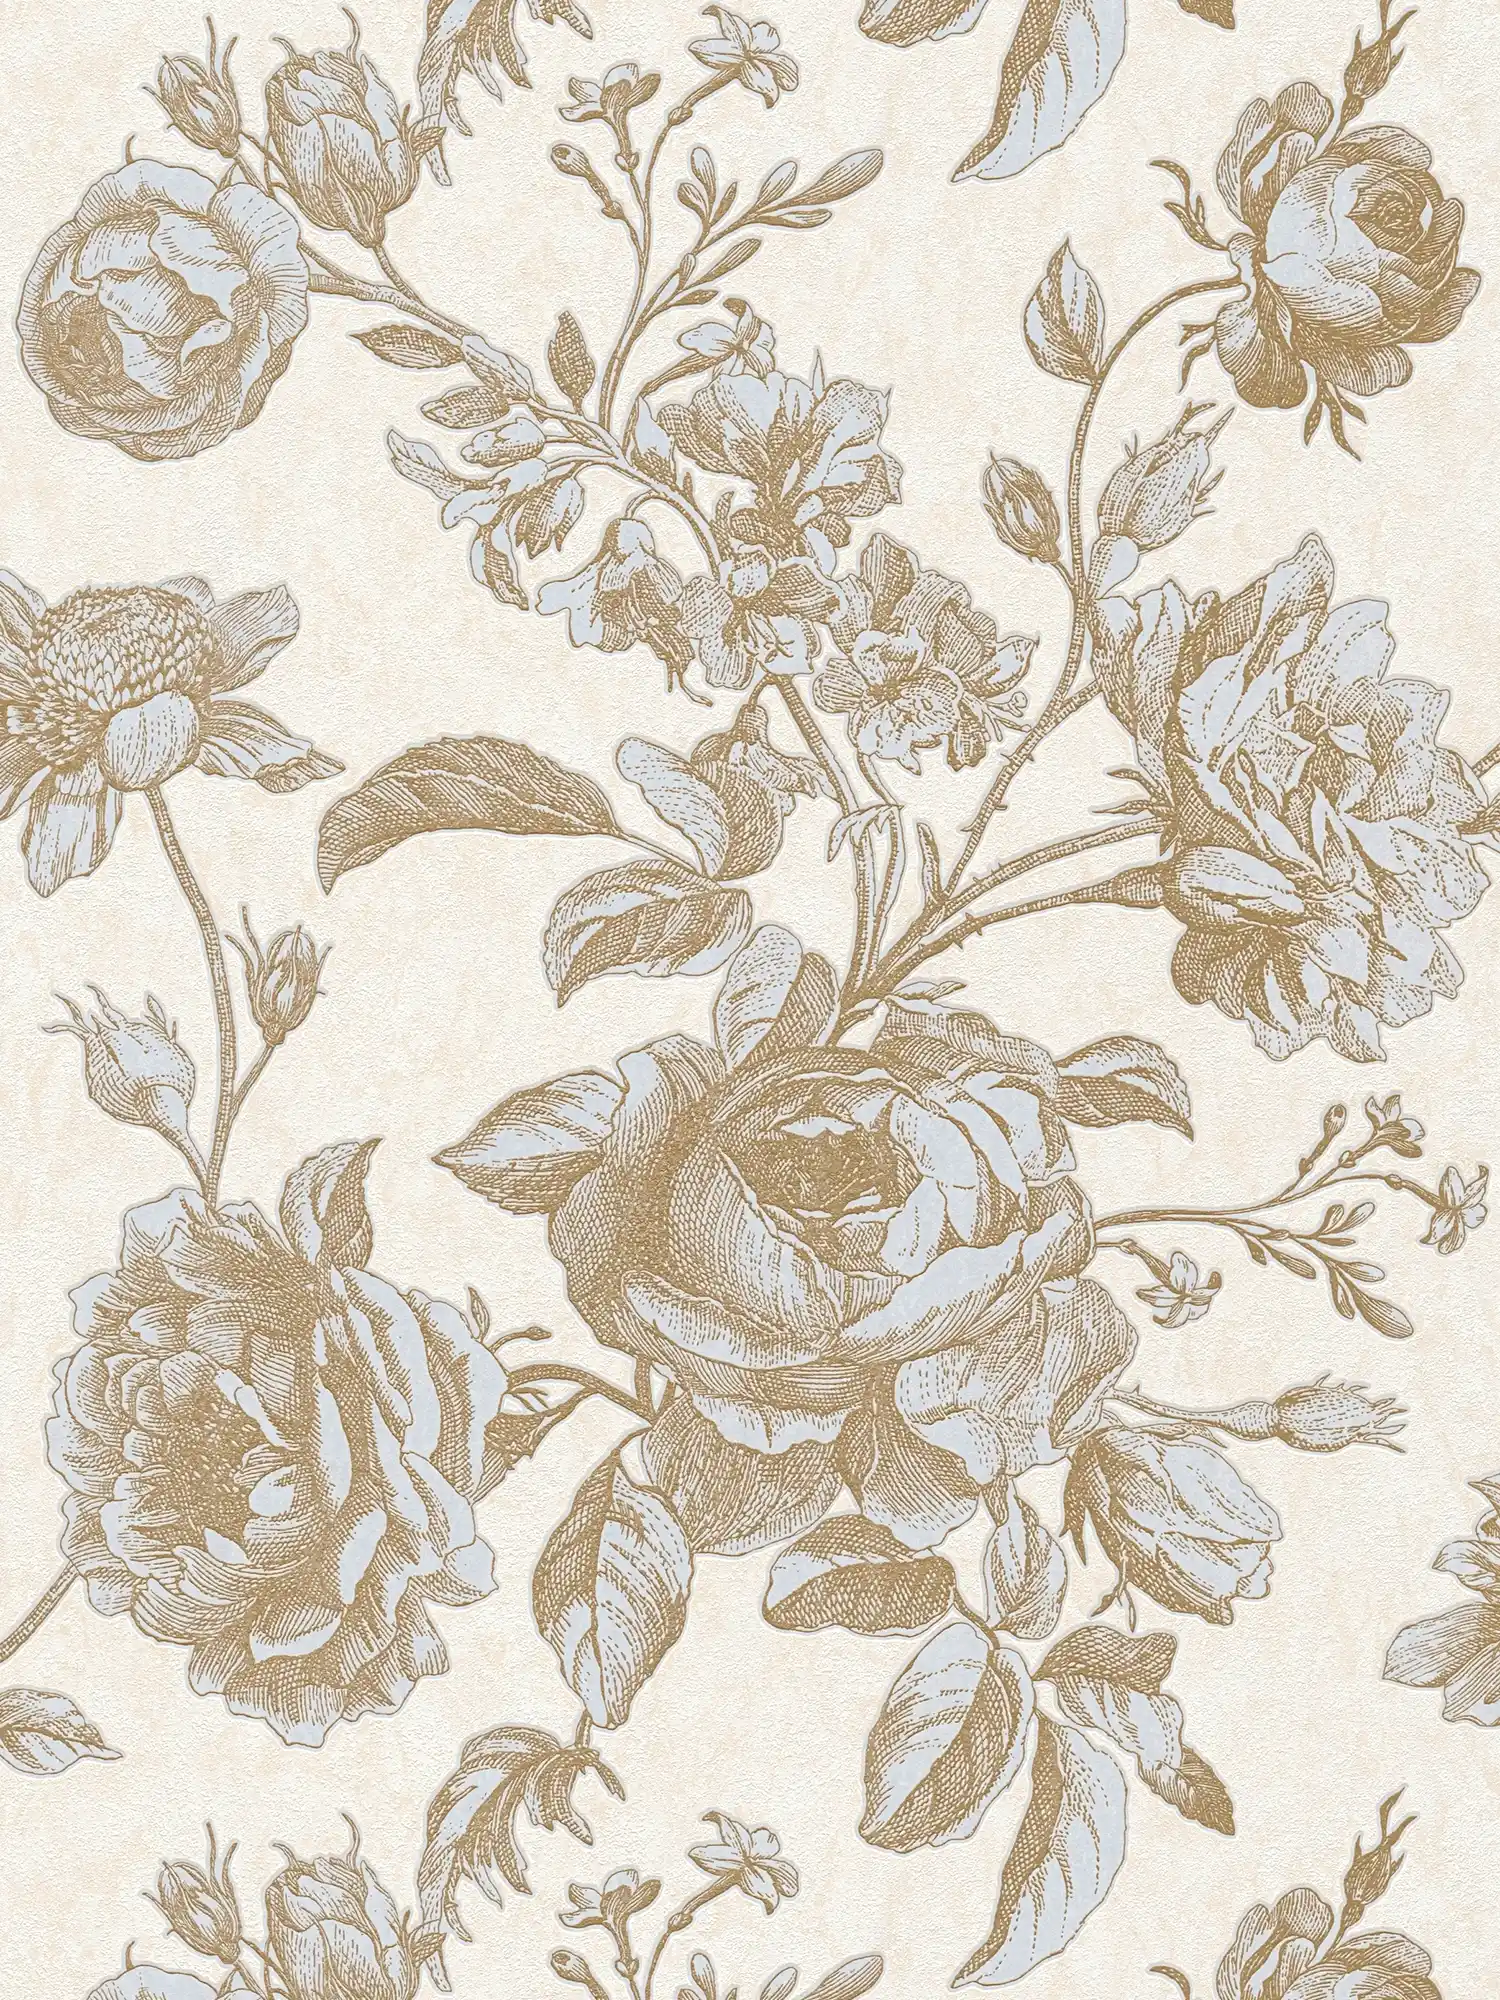 Vintage wallpaper with roses pattern in graphic style - metallic, cream
